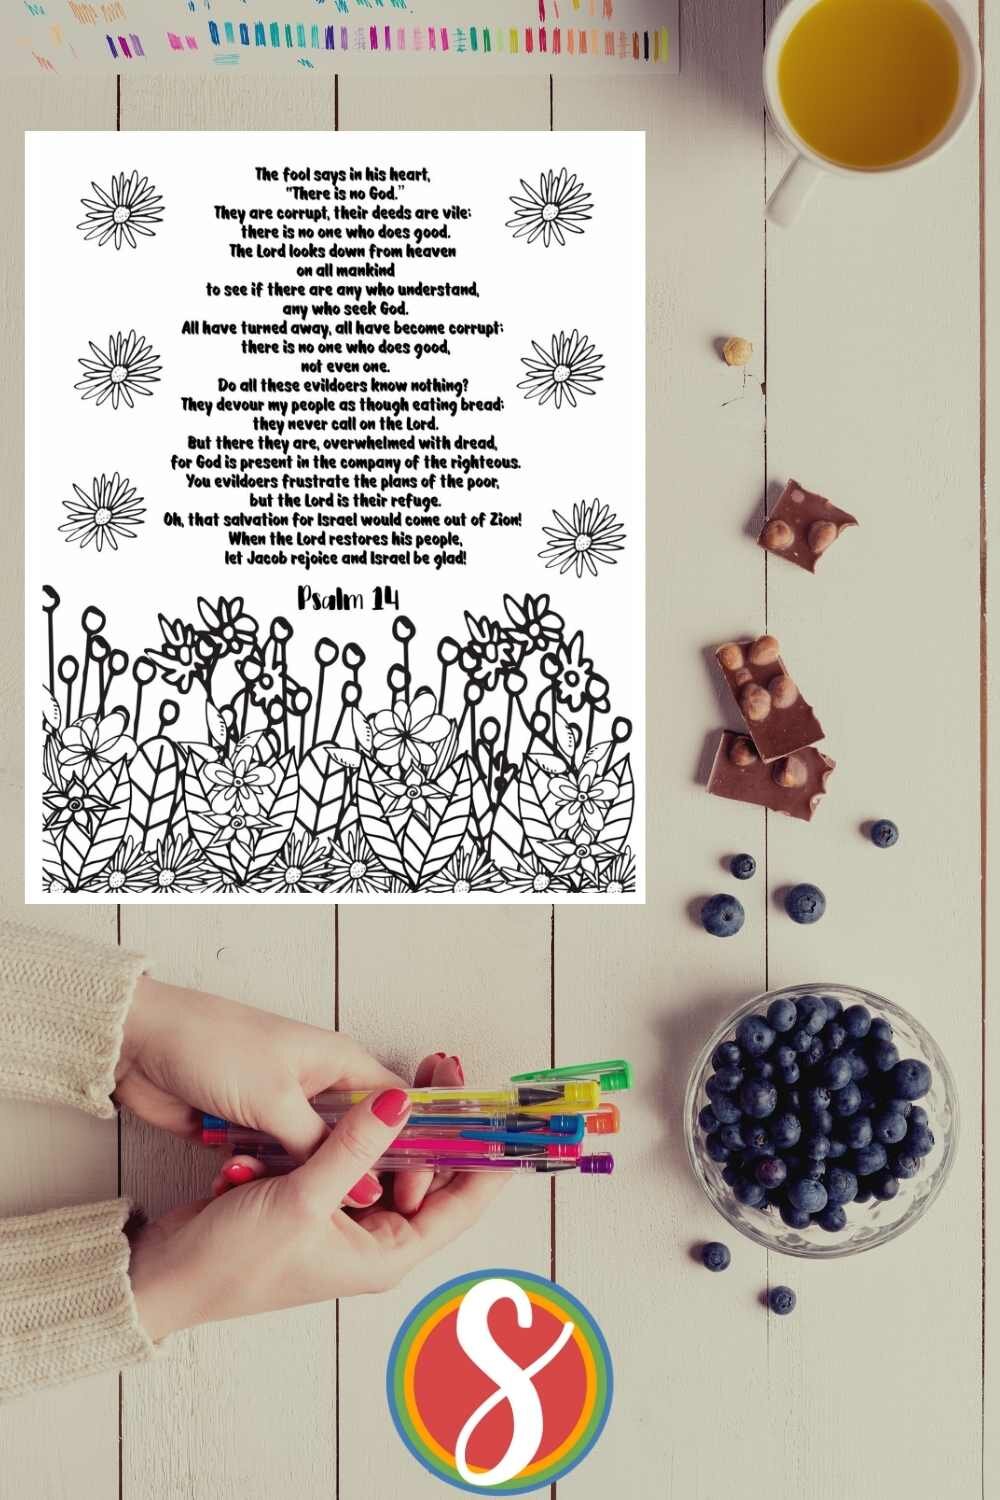 Free Psalm 14 coloring page from Stevie Doodles - a page for every Psalm